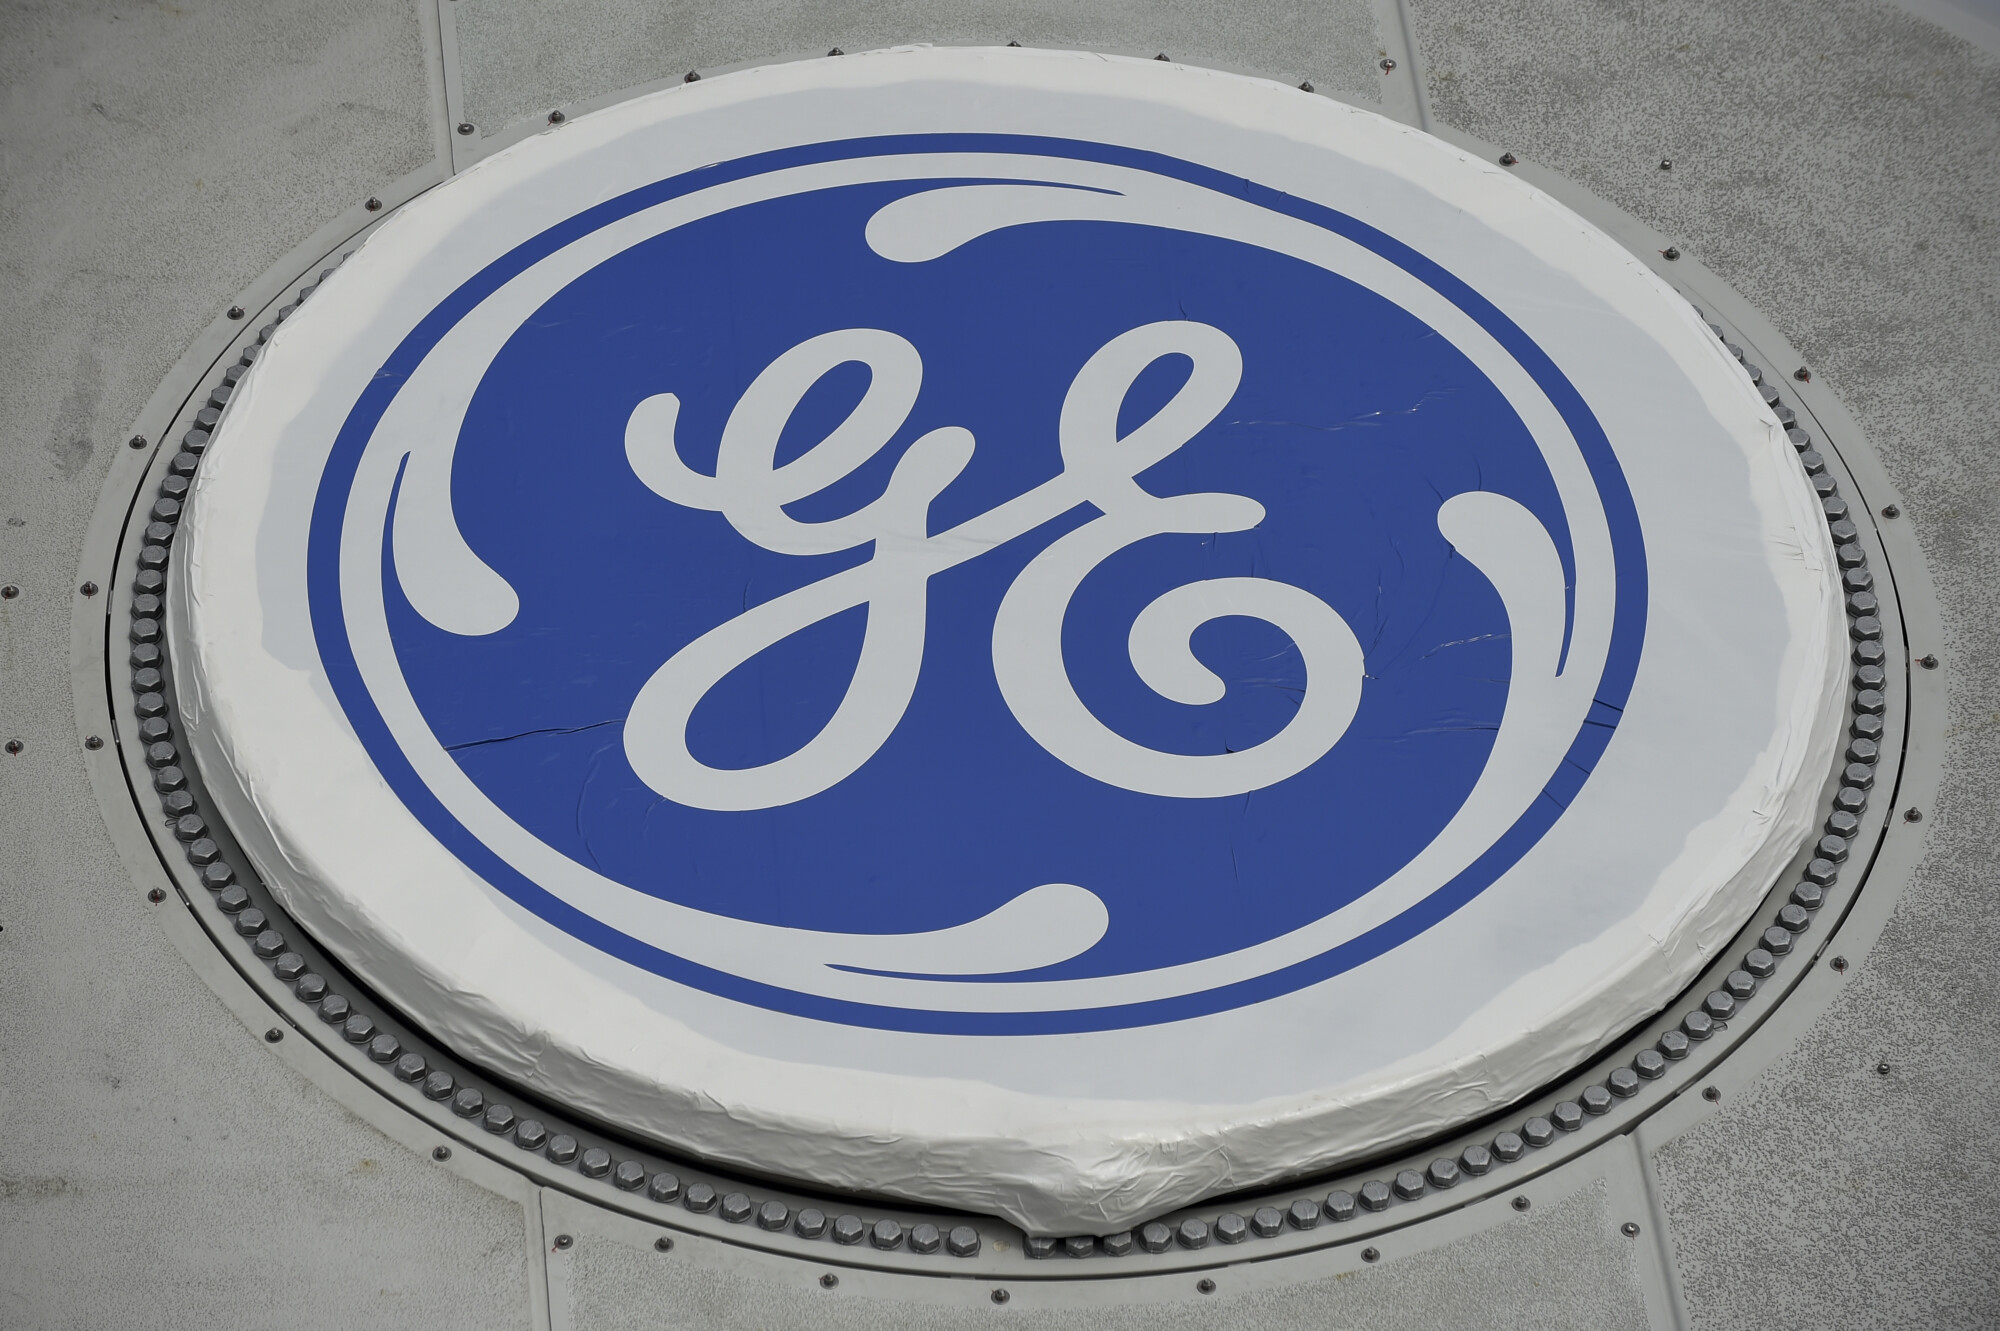 GE, AerCap Join Air Leasing Businesses in $30 Billion Deal